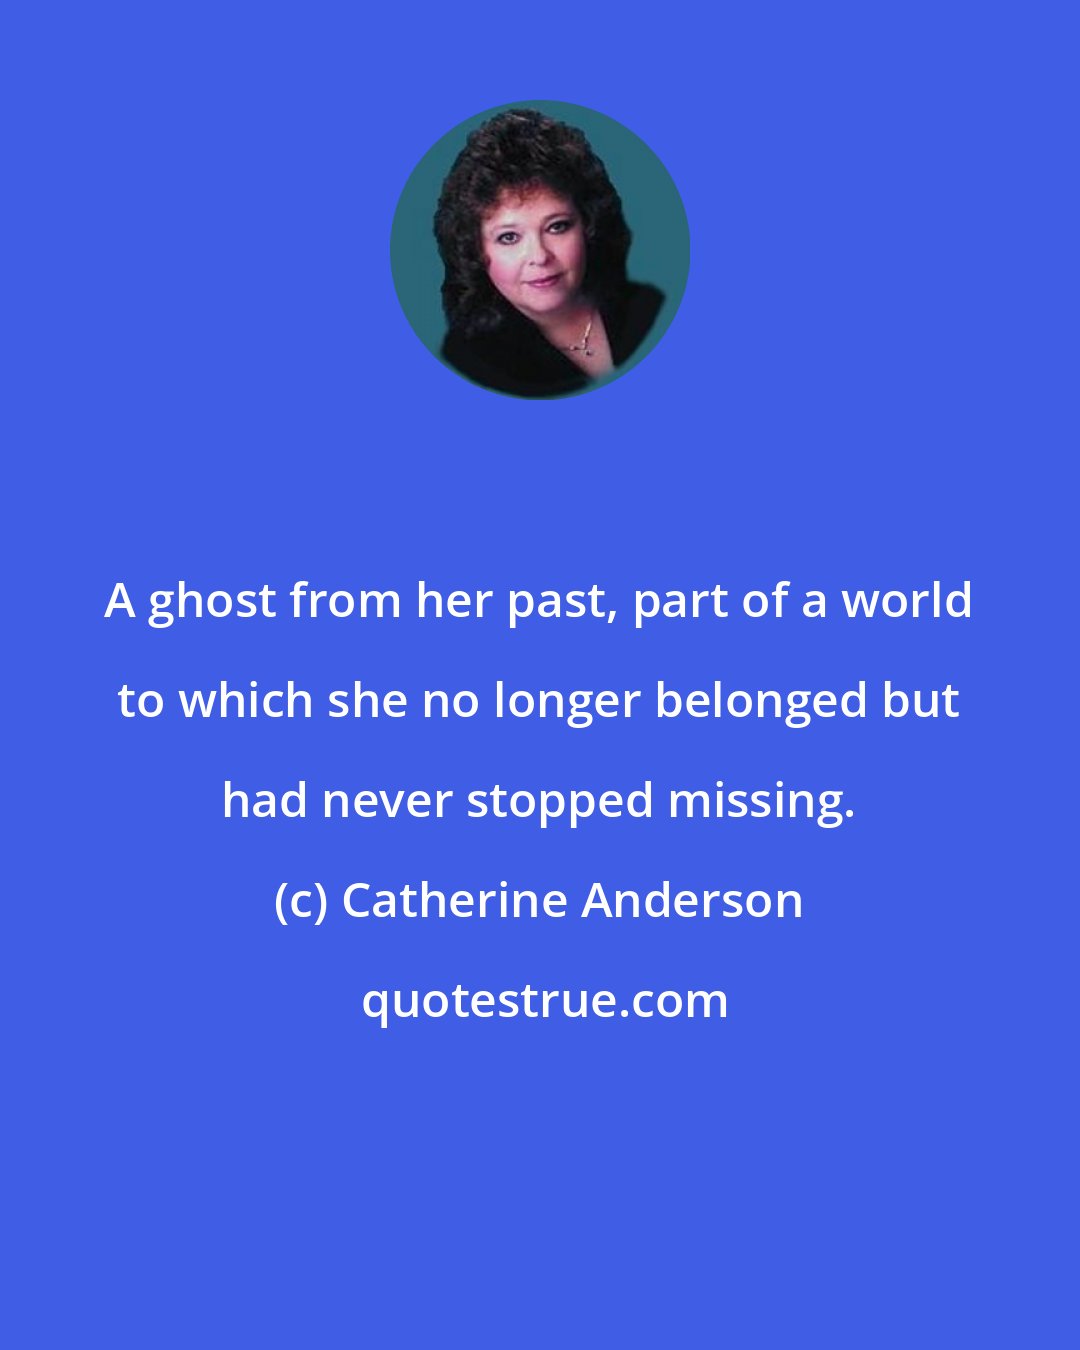 Catherine Anderson: A ghost from her past, part of a world to which she no longer belonged but had never stopped missing.